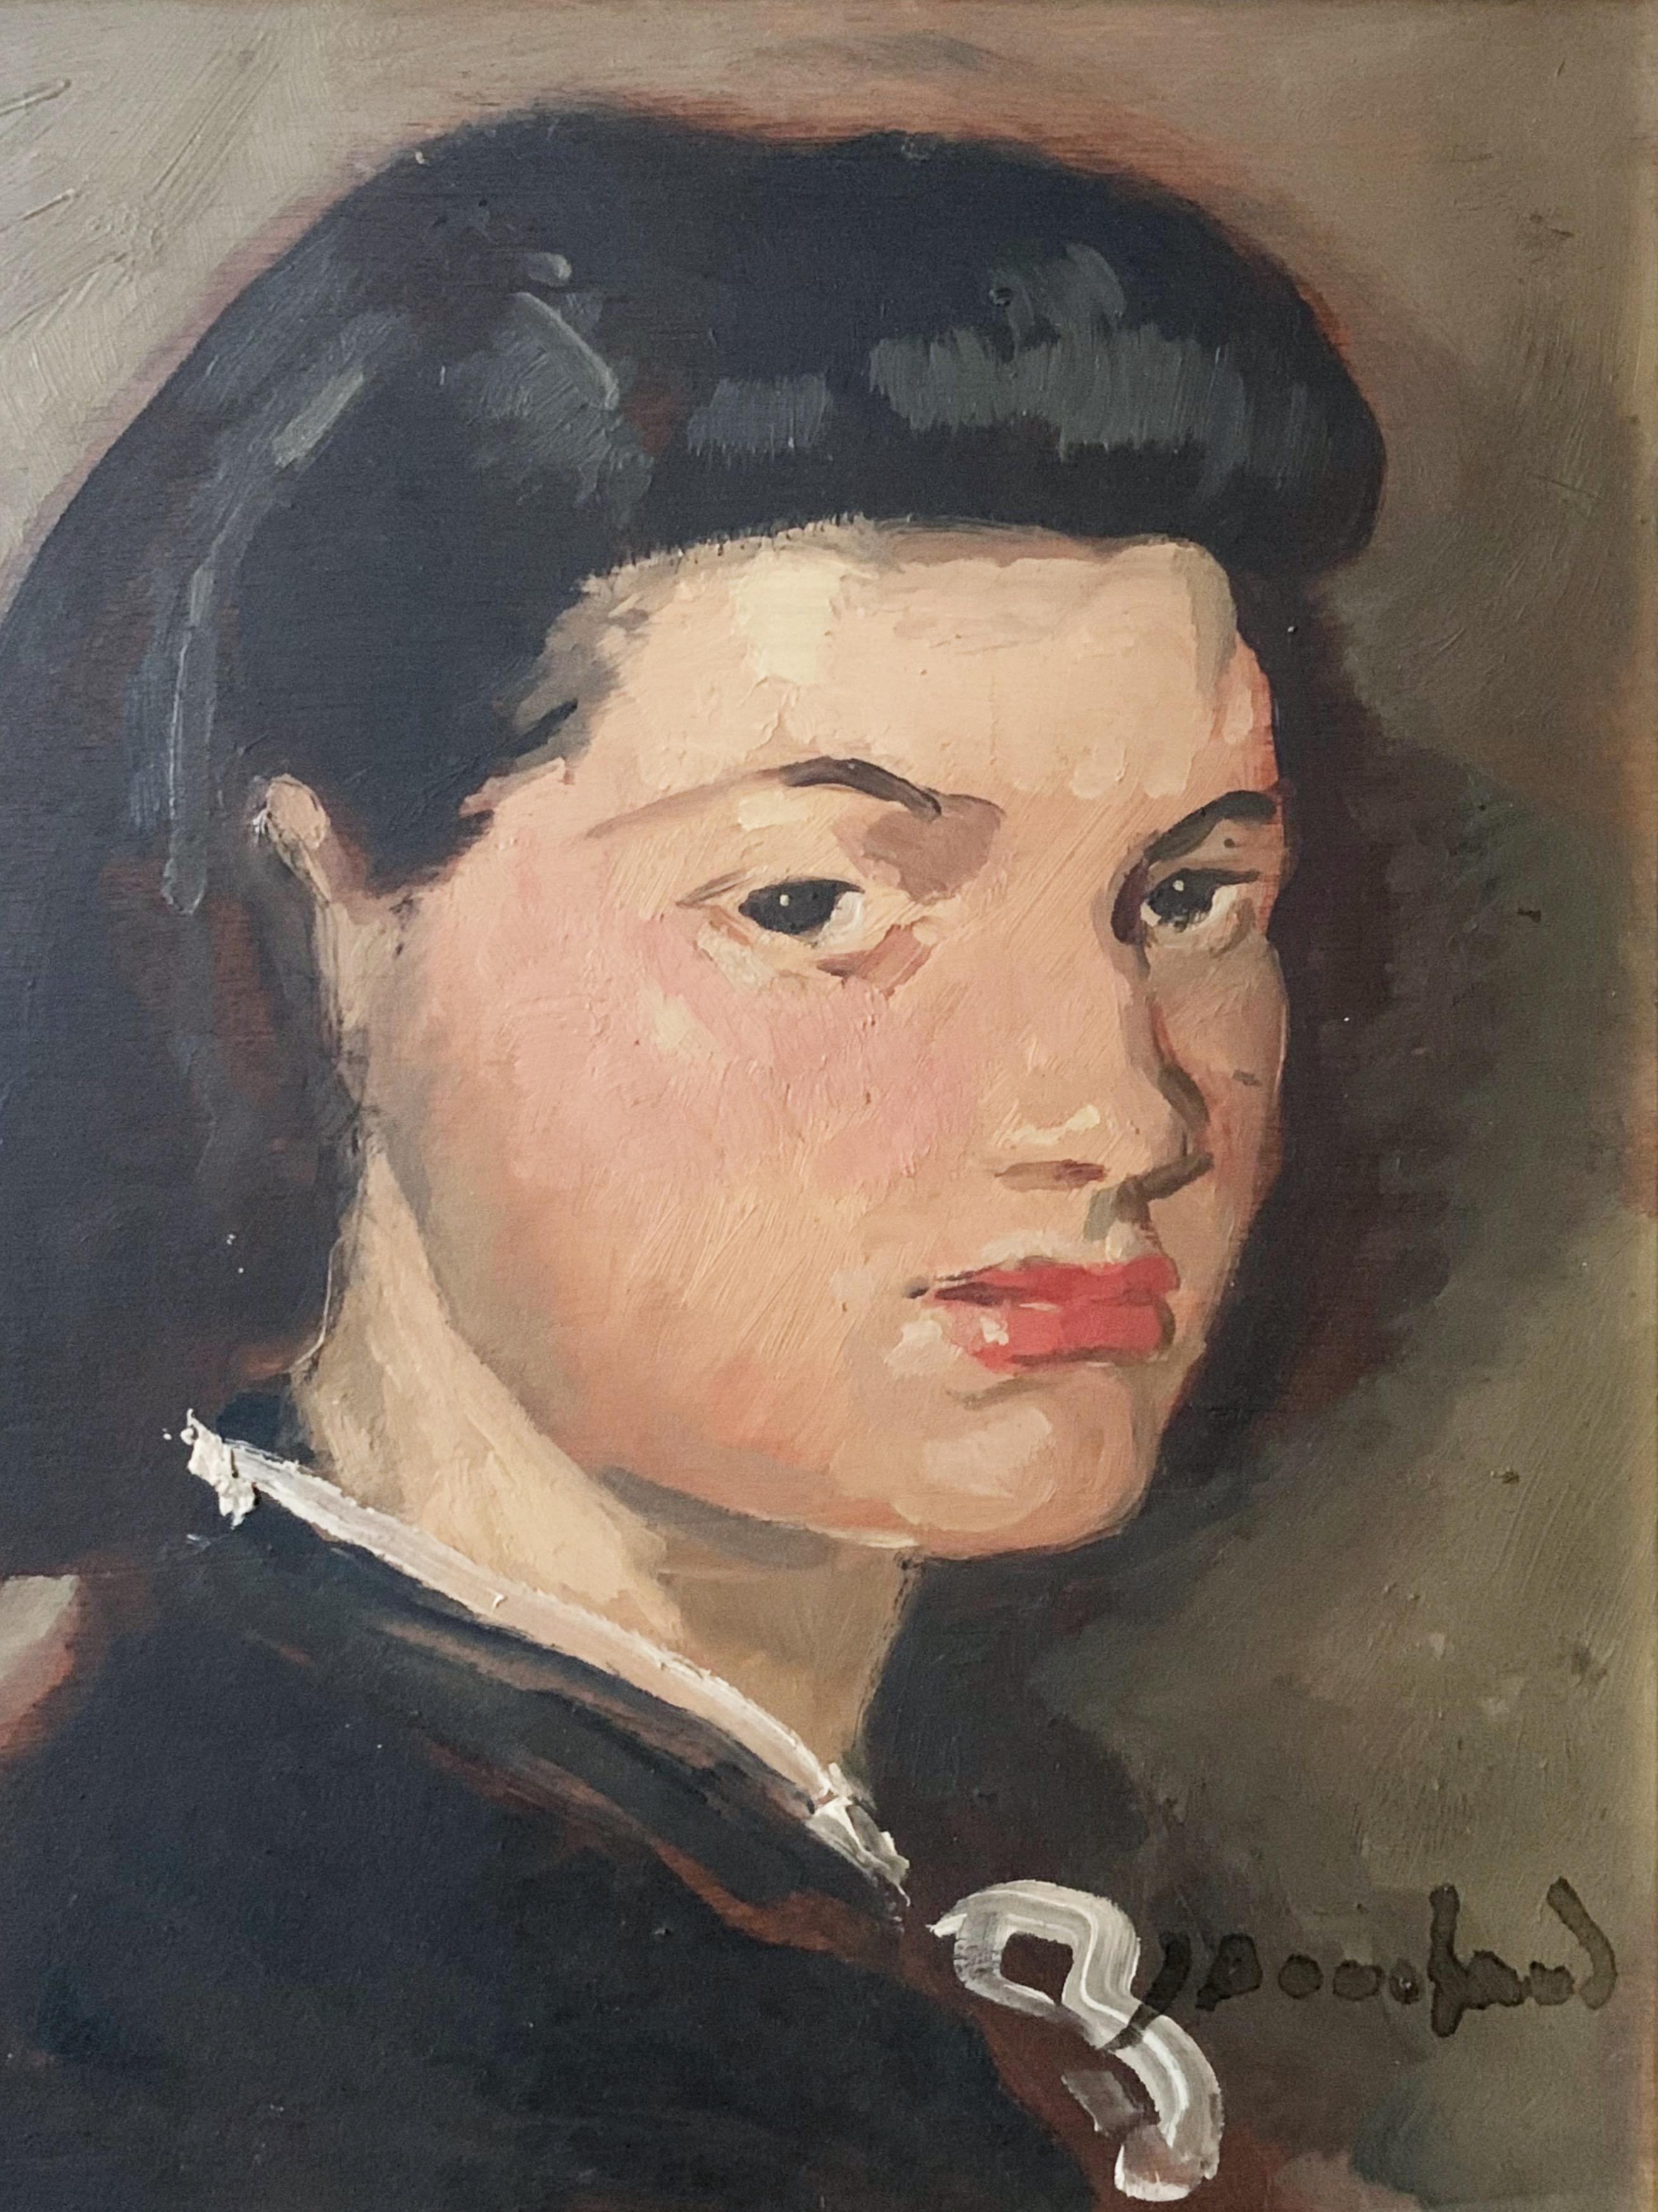 Jean BOUCHAUD (1891-1977)
Portrait of a woman 
Oil on panel
Signed “J Bouchaud” lower right
Dimensions of the work without frame: 23.5 x 18.5 cm

A native of the Loire-Atlantique region, Jean Bouchaud is the grandson of Léon Bouchaud, a painter from